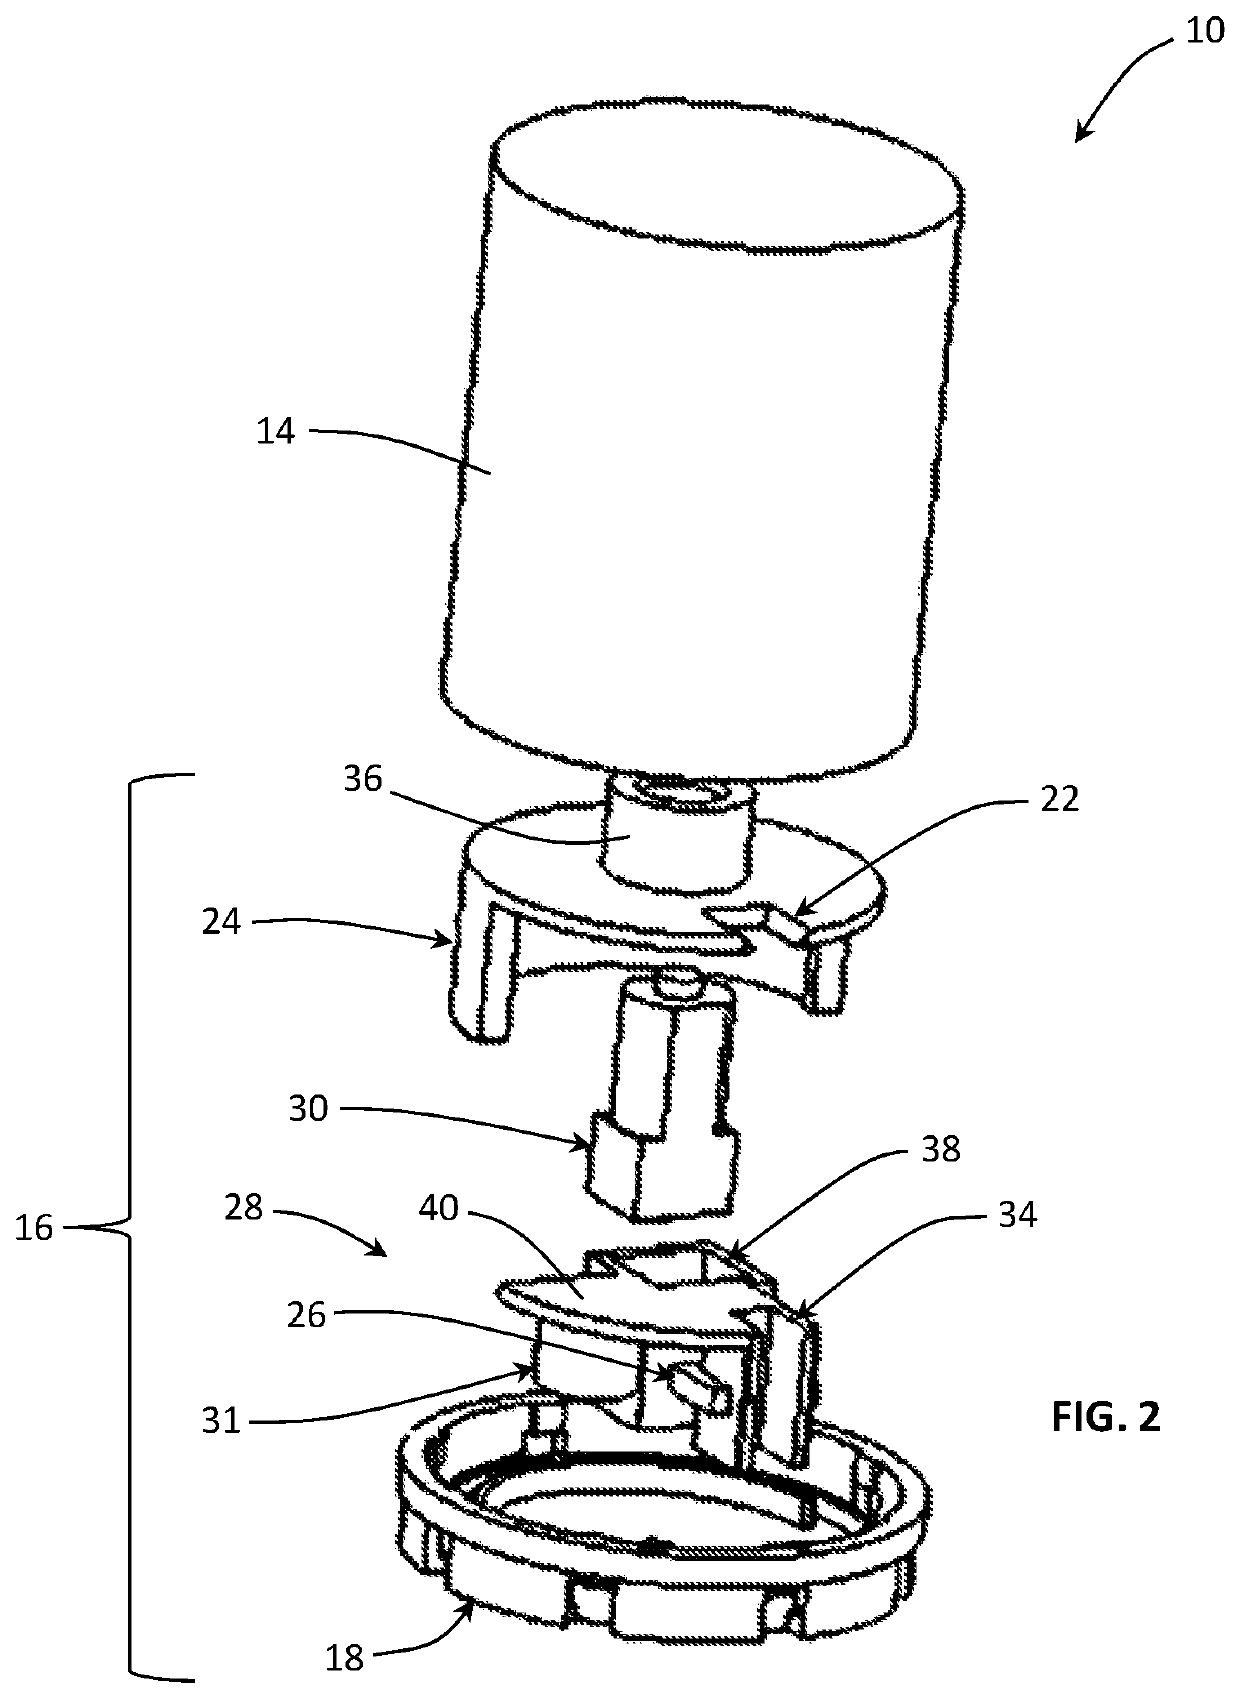 Medication-dispensing system and method